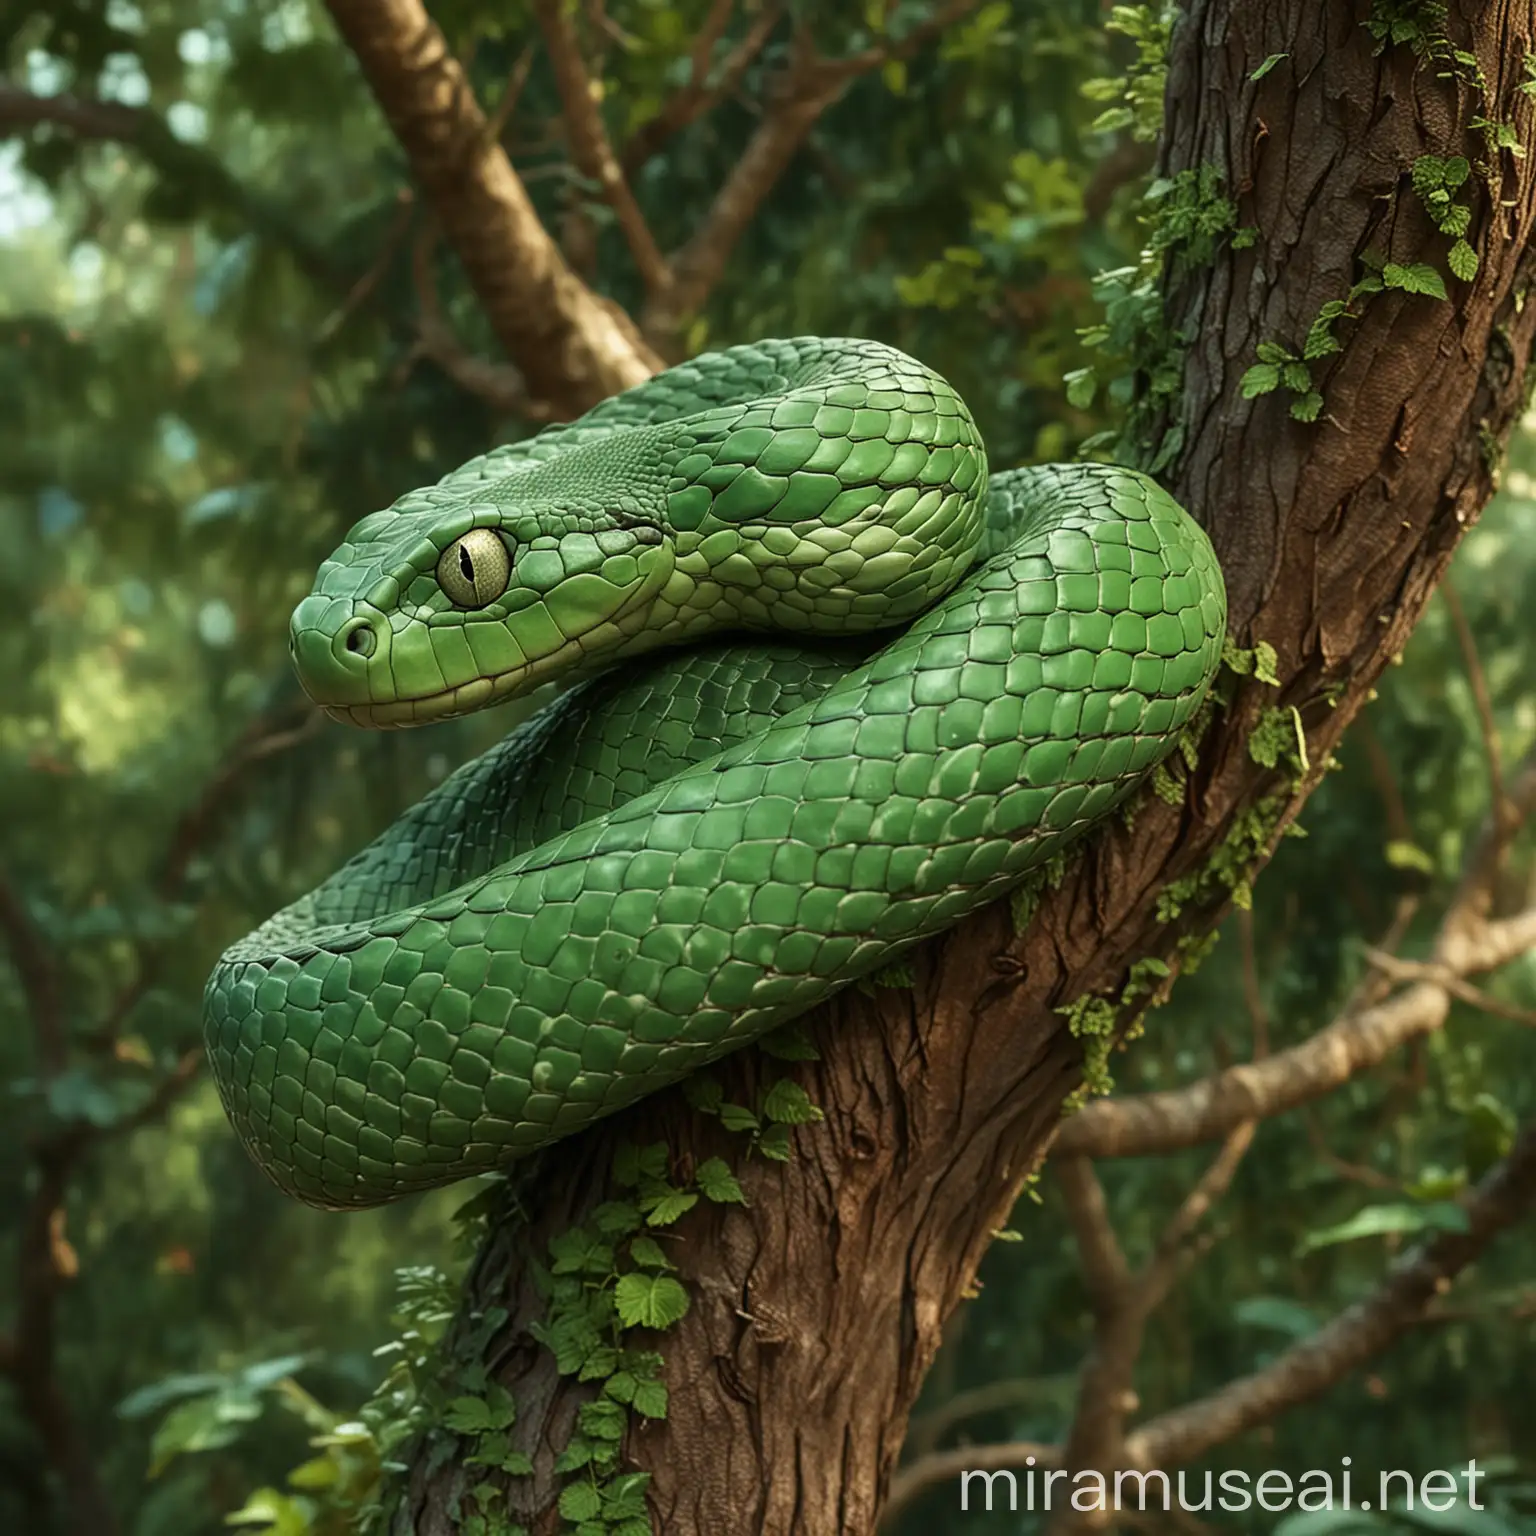 Green Snake Coiled on Tree Branch Disney Pixar Style